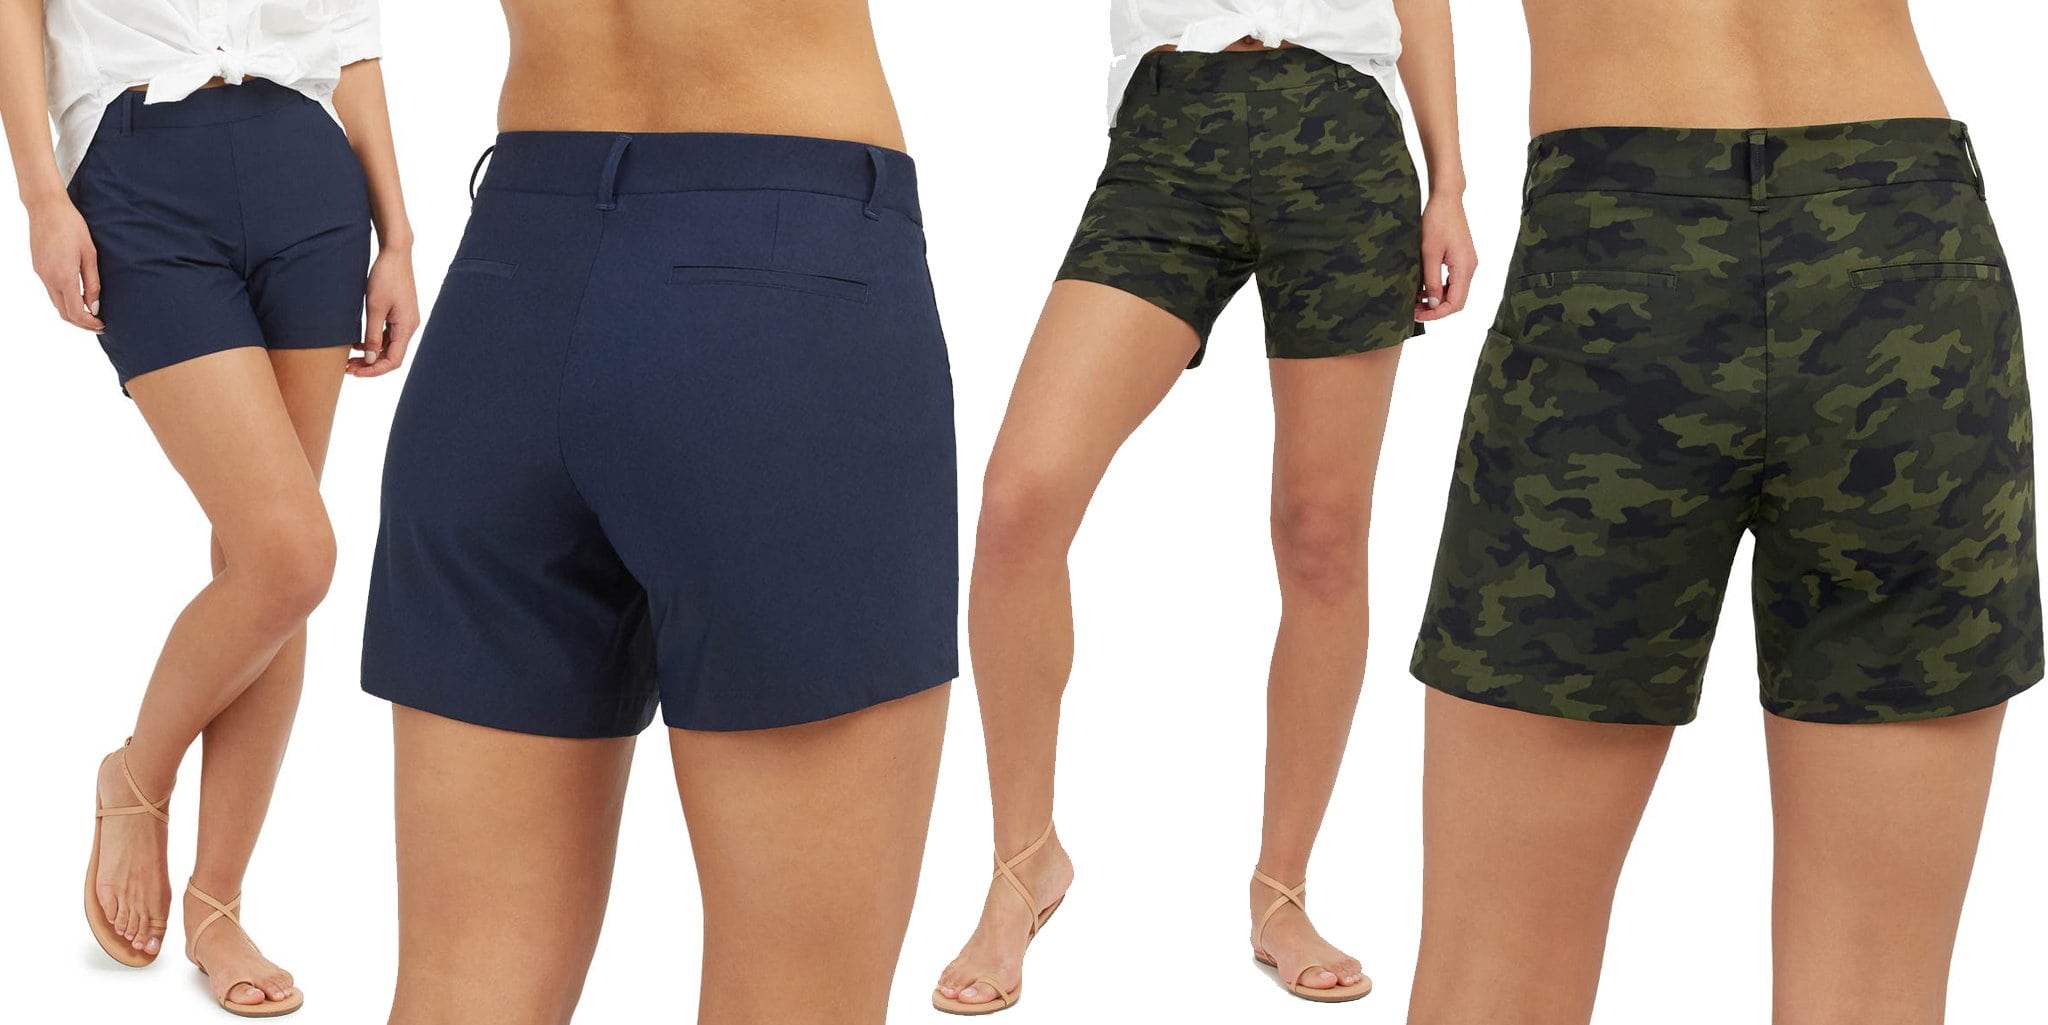 Available in plain and camo print, the Sunshine shorts by Spanx are made of lightweight, stretchy, and quick-drying nylon and elastane materials